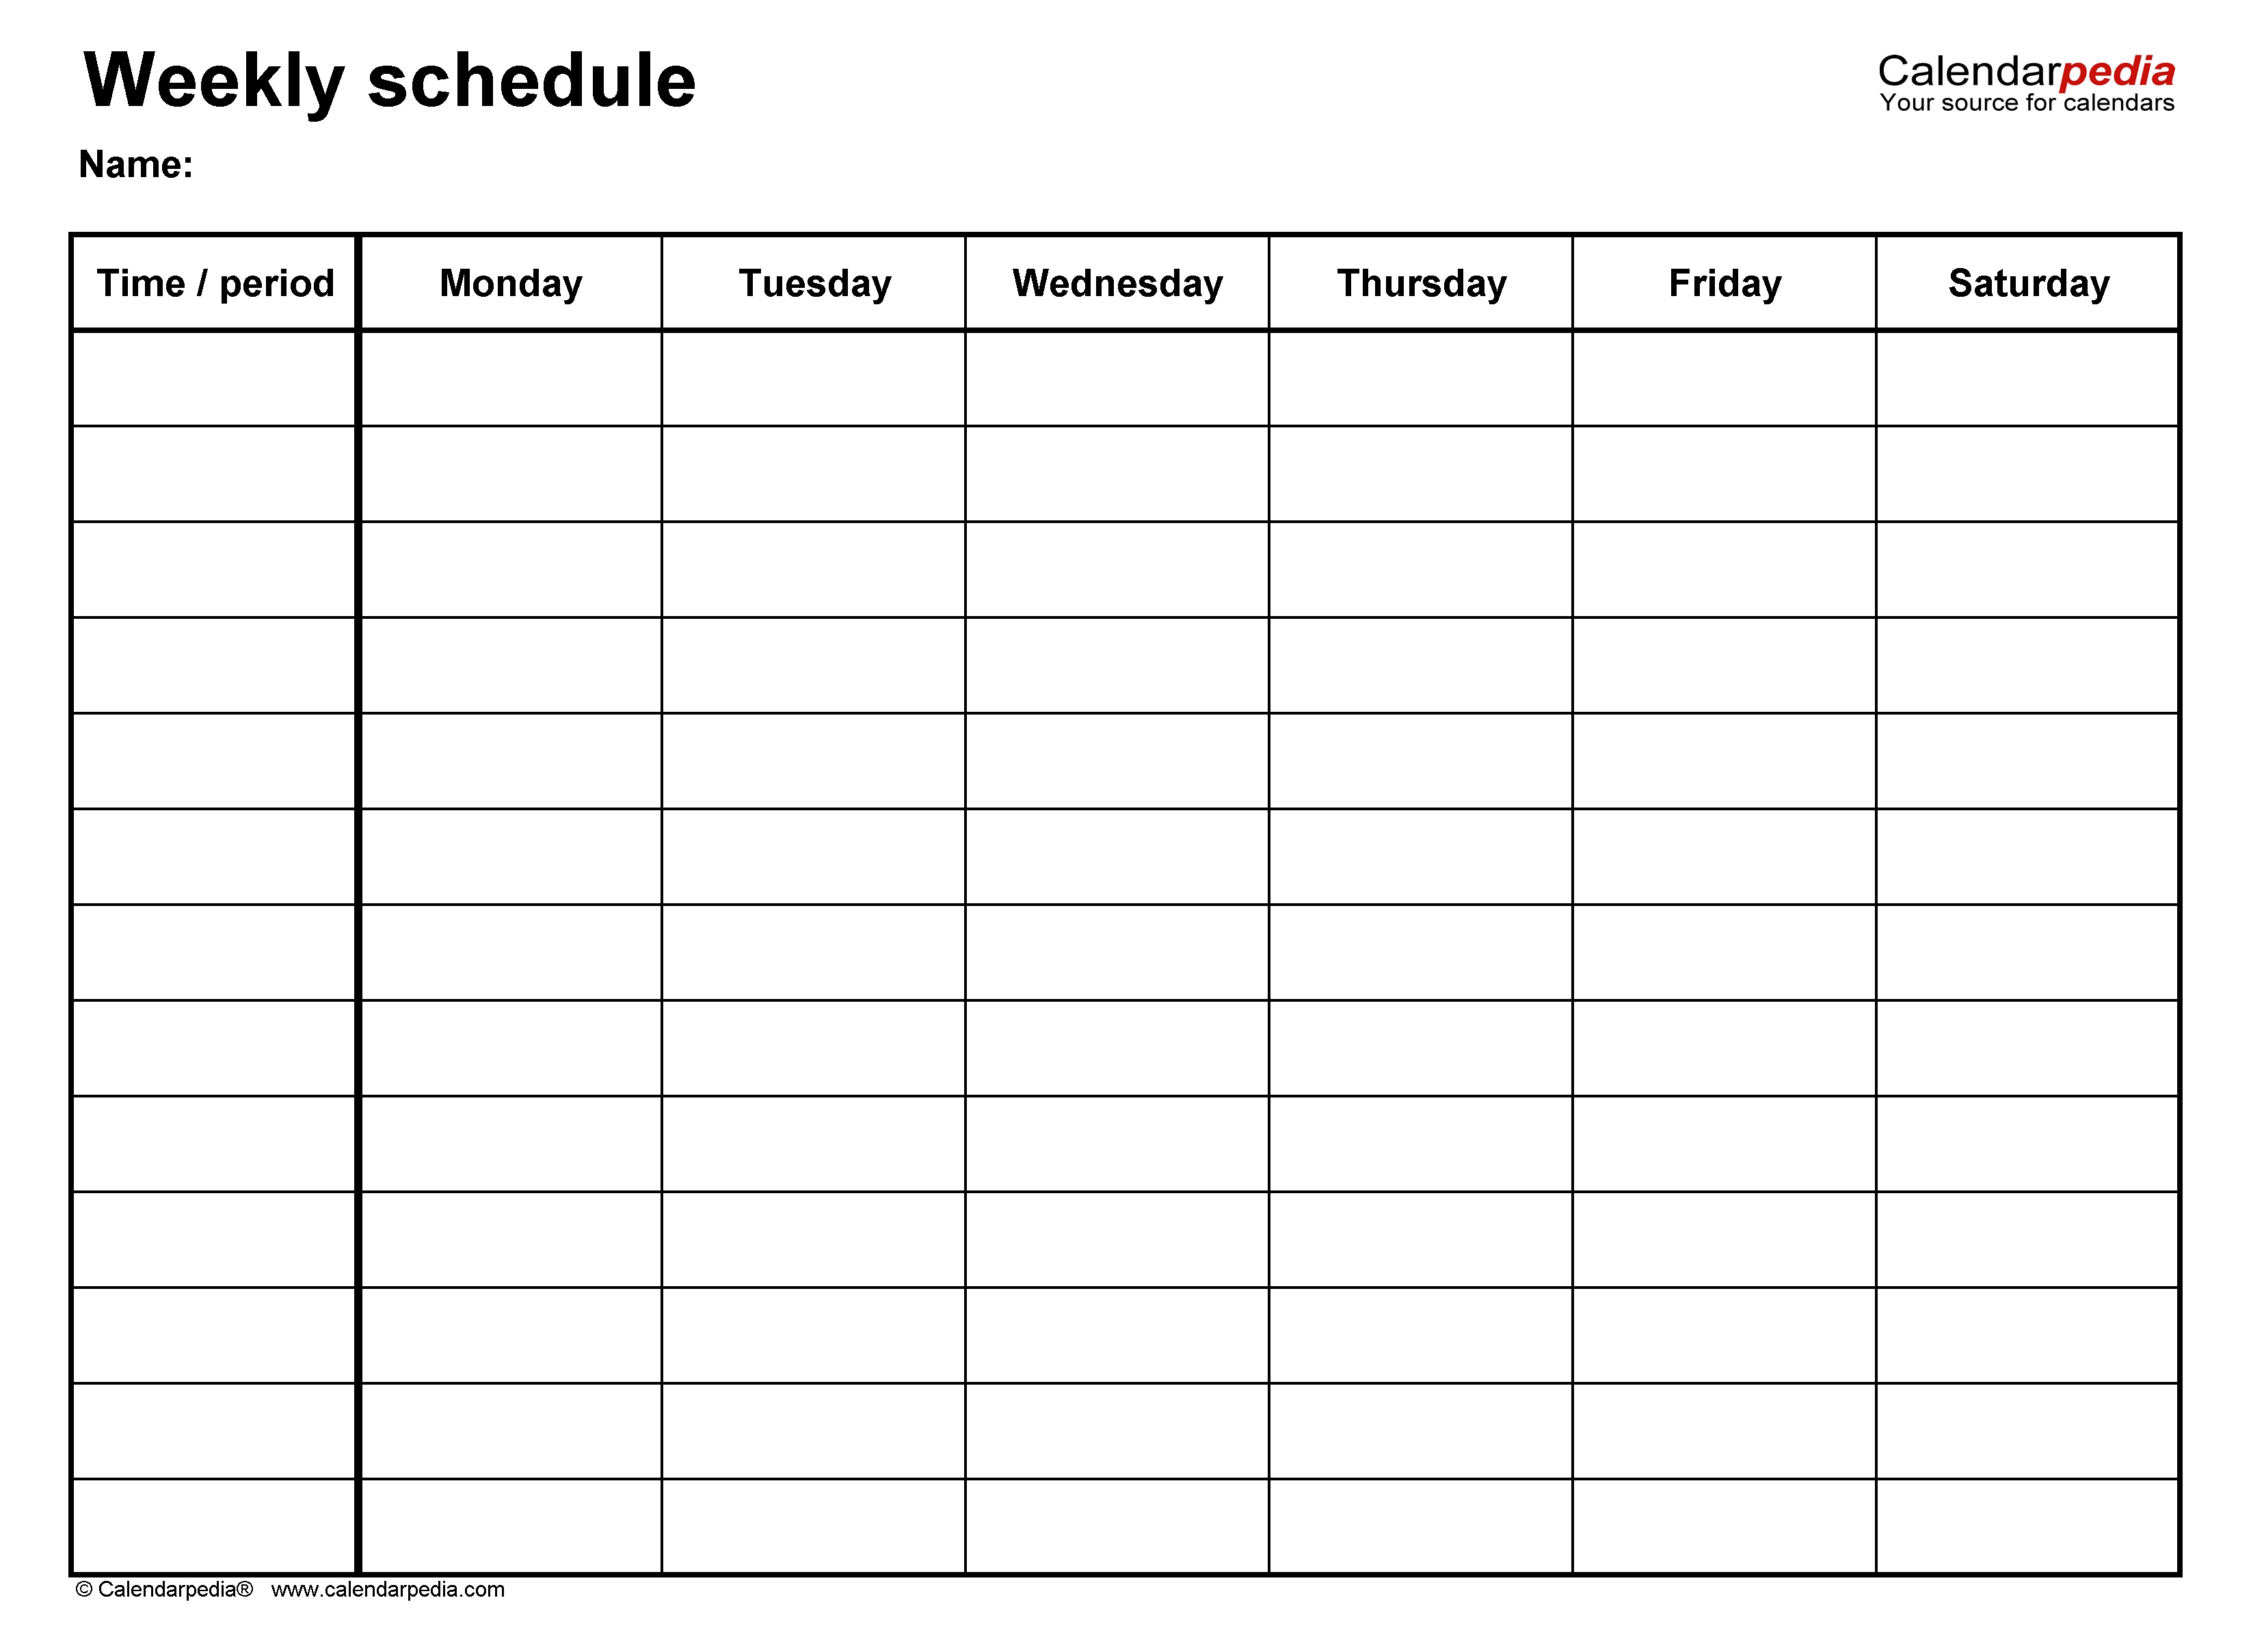 Free Weekly Schedule Templates For Word - 18 Templates-Monday To Friday Word Template